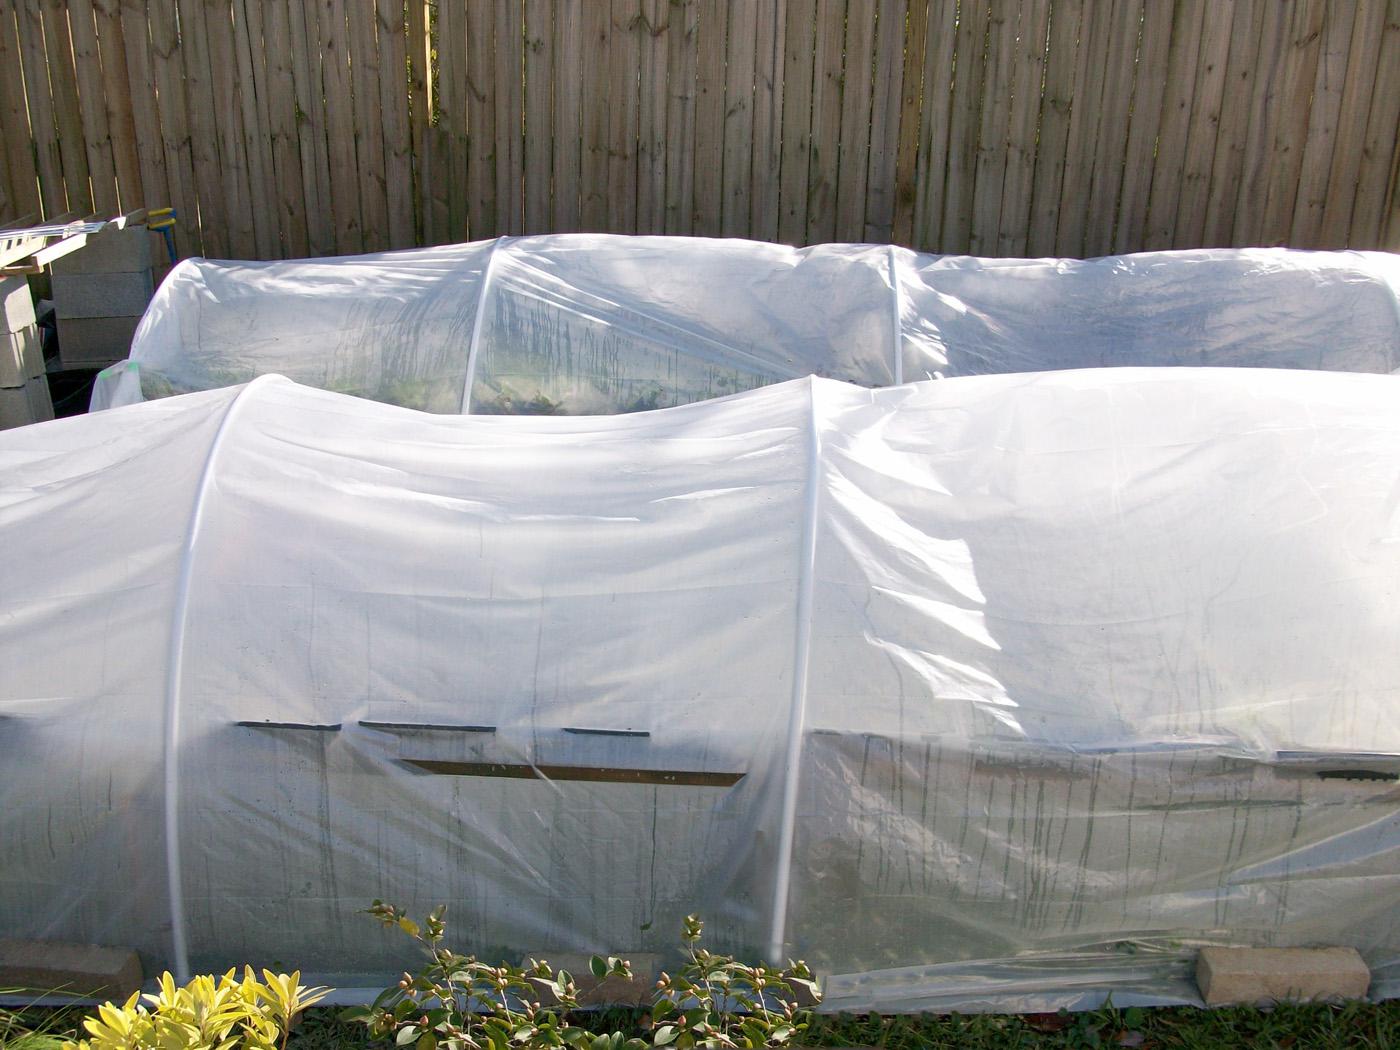 Use PVC pipe and plastic sheeting to make a simple greenhouse structure to provide cold-weather protection for landscape plants.